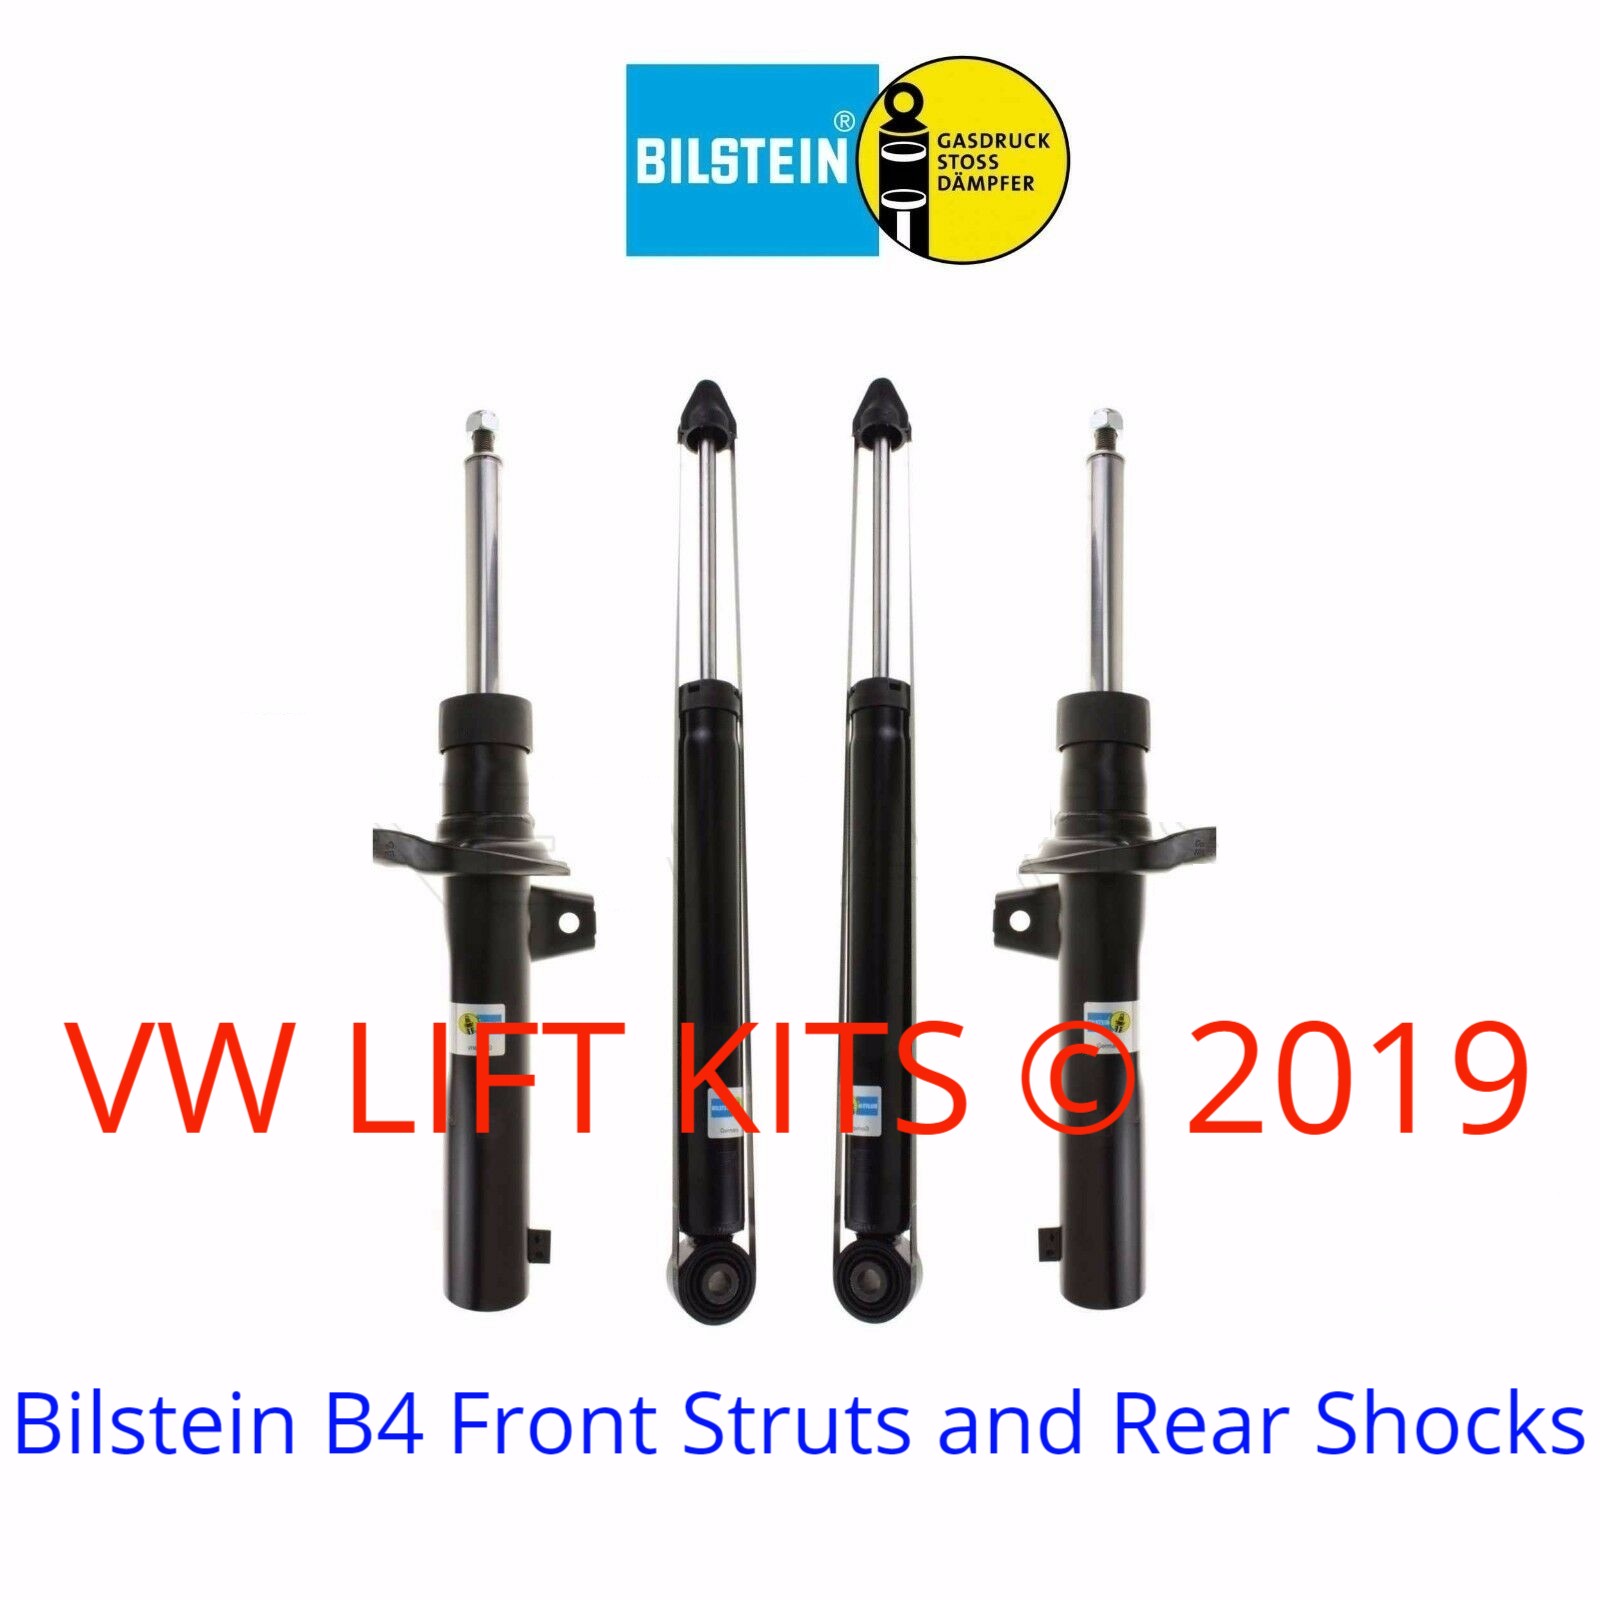 These twin tube Bilstein B4 rear shocks provide a firmer better quality ride while also helping with moderate off-road terrains.  